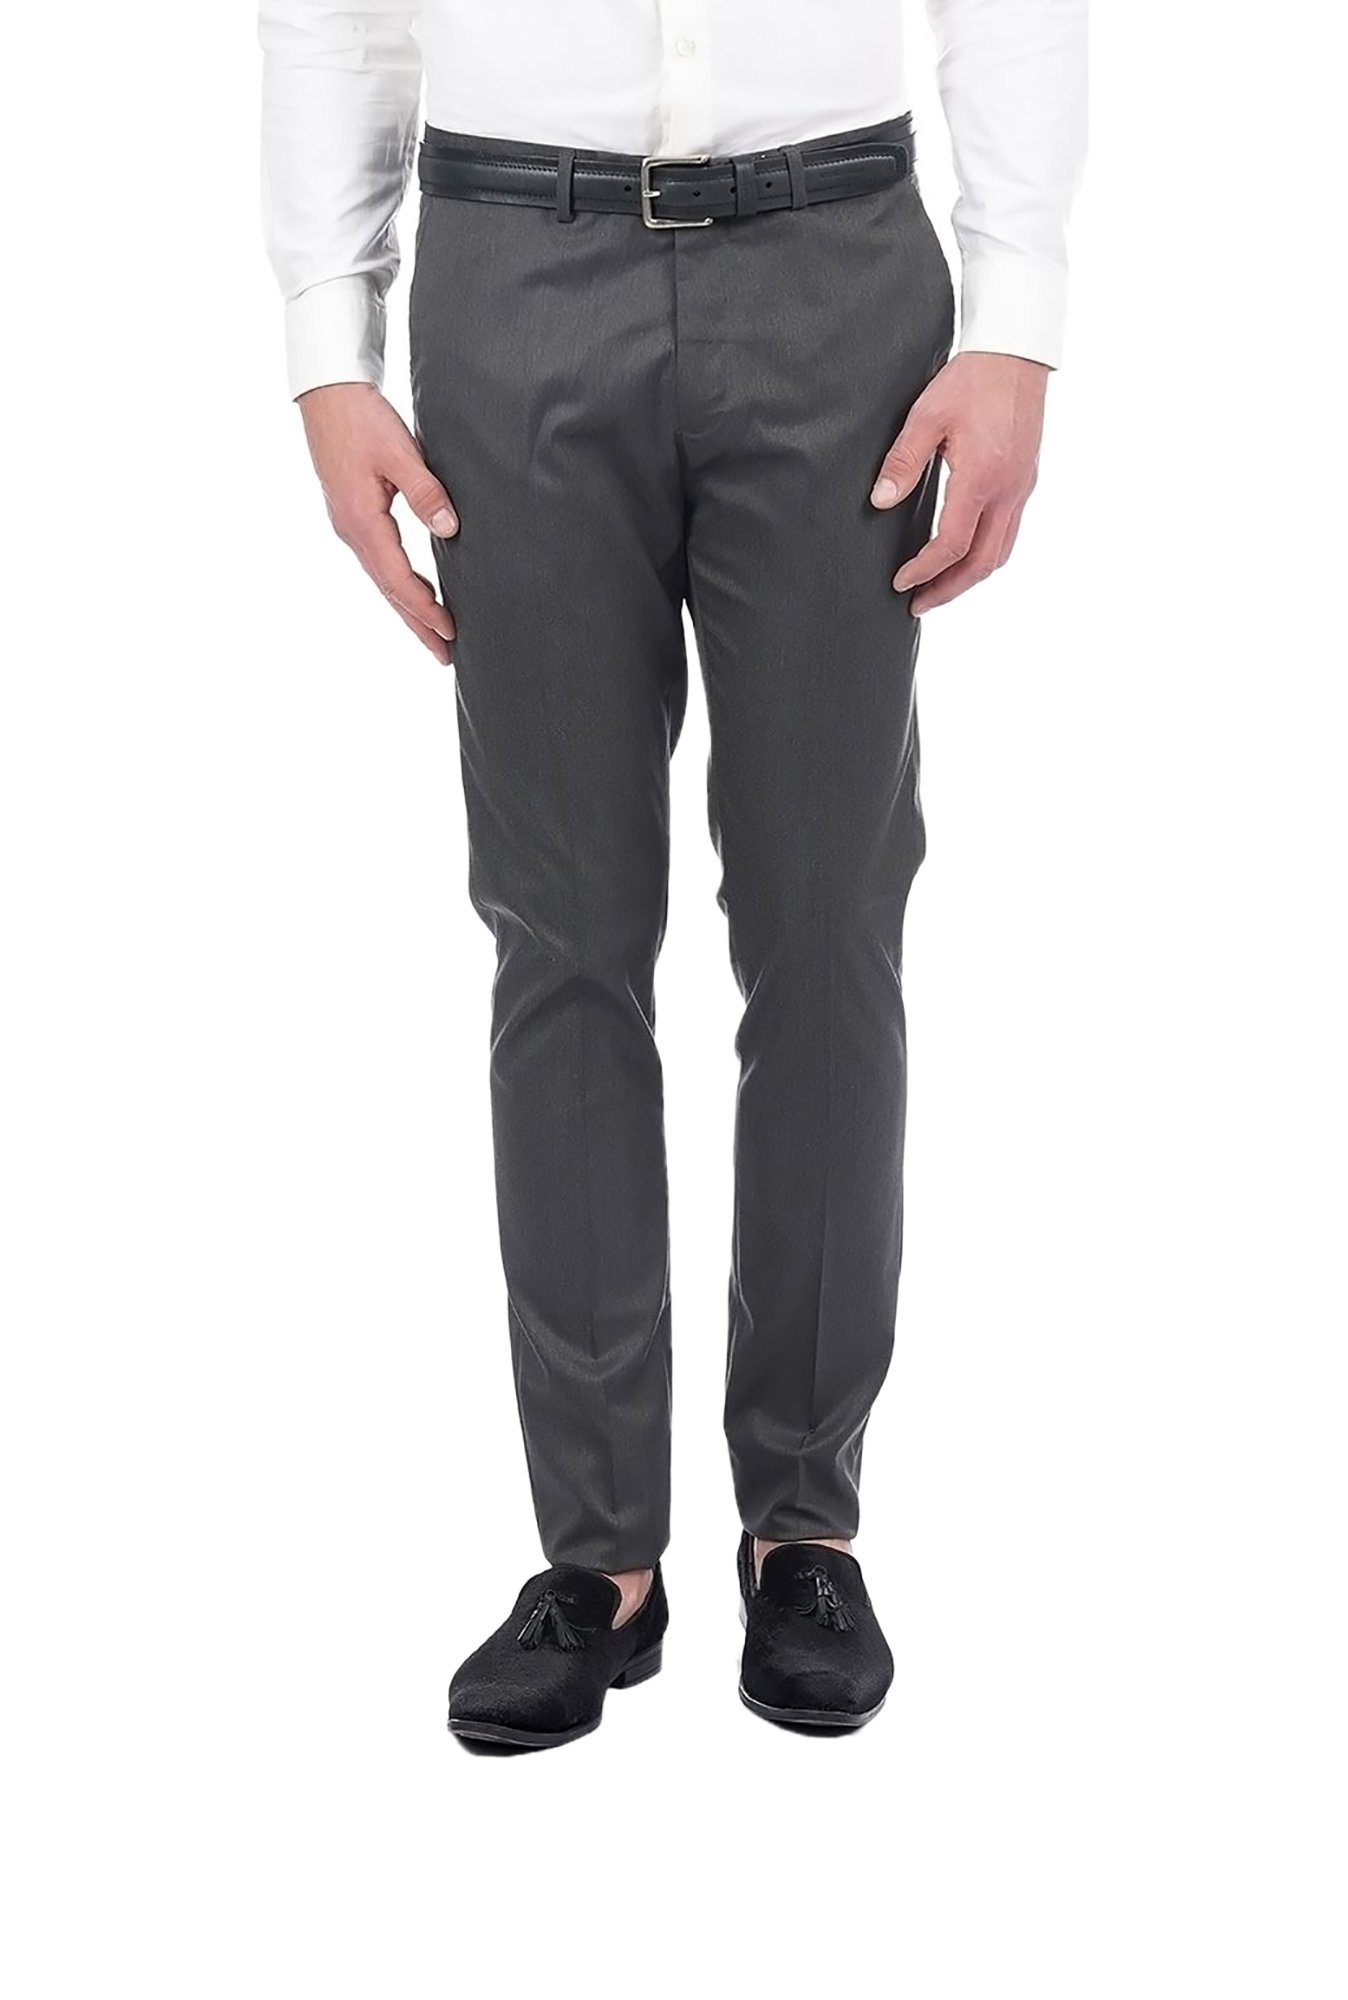 Us Polo Assn Trousers  Buy Latest Us Polo Assn Trousers Online  Myntra